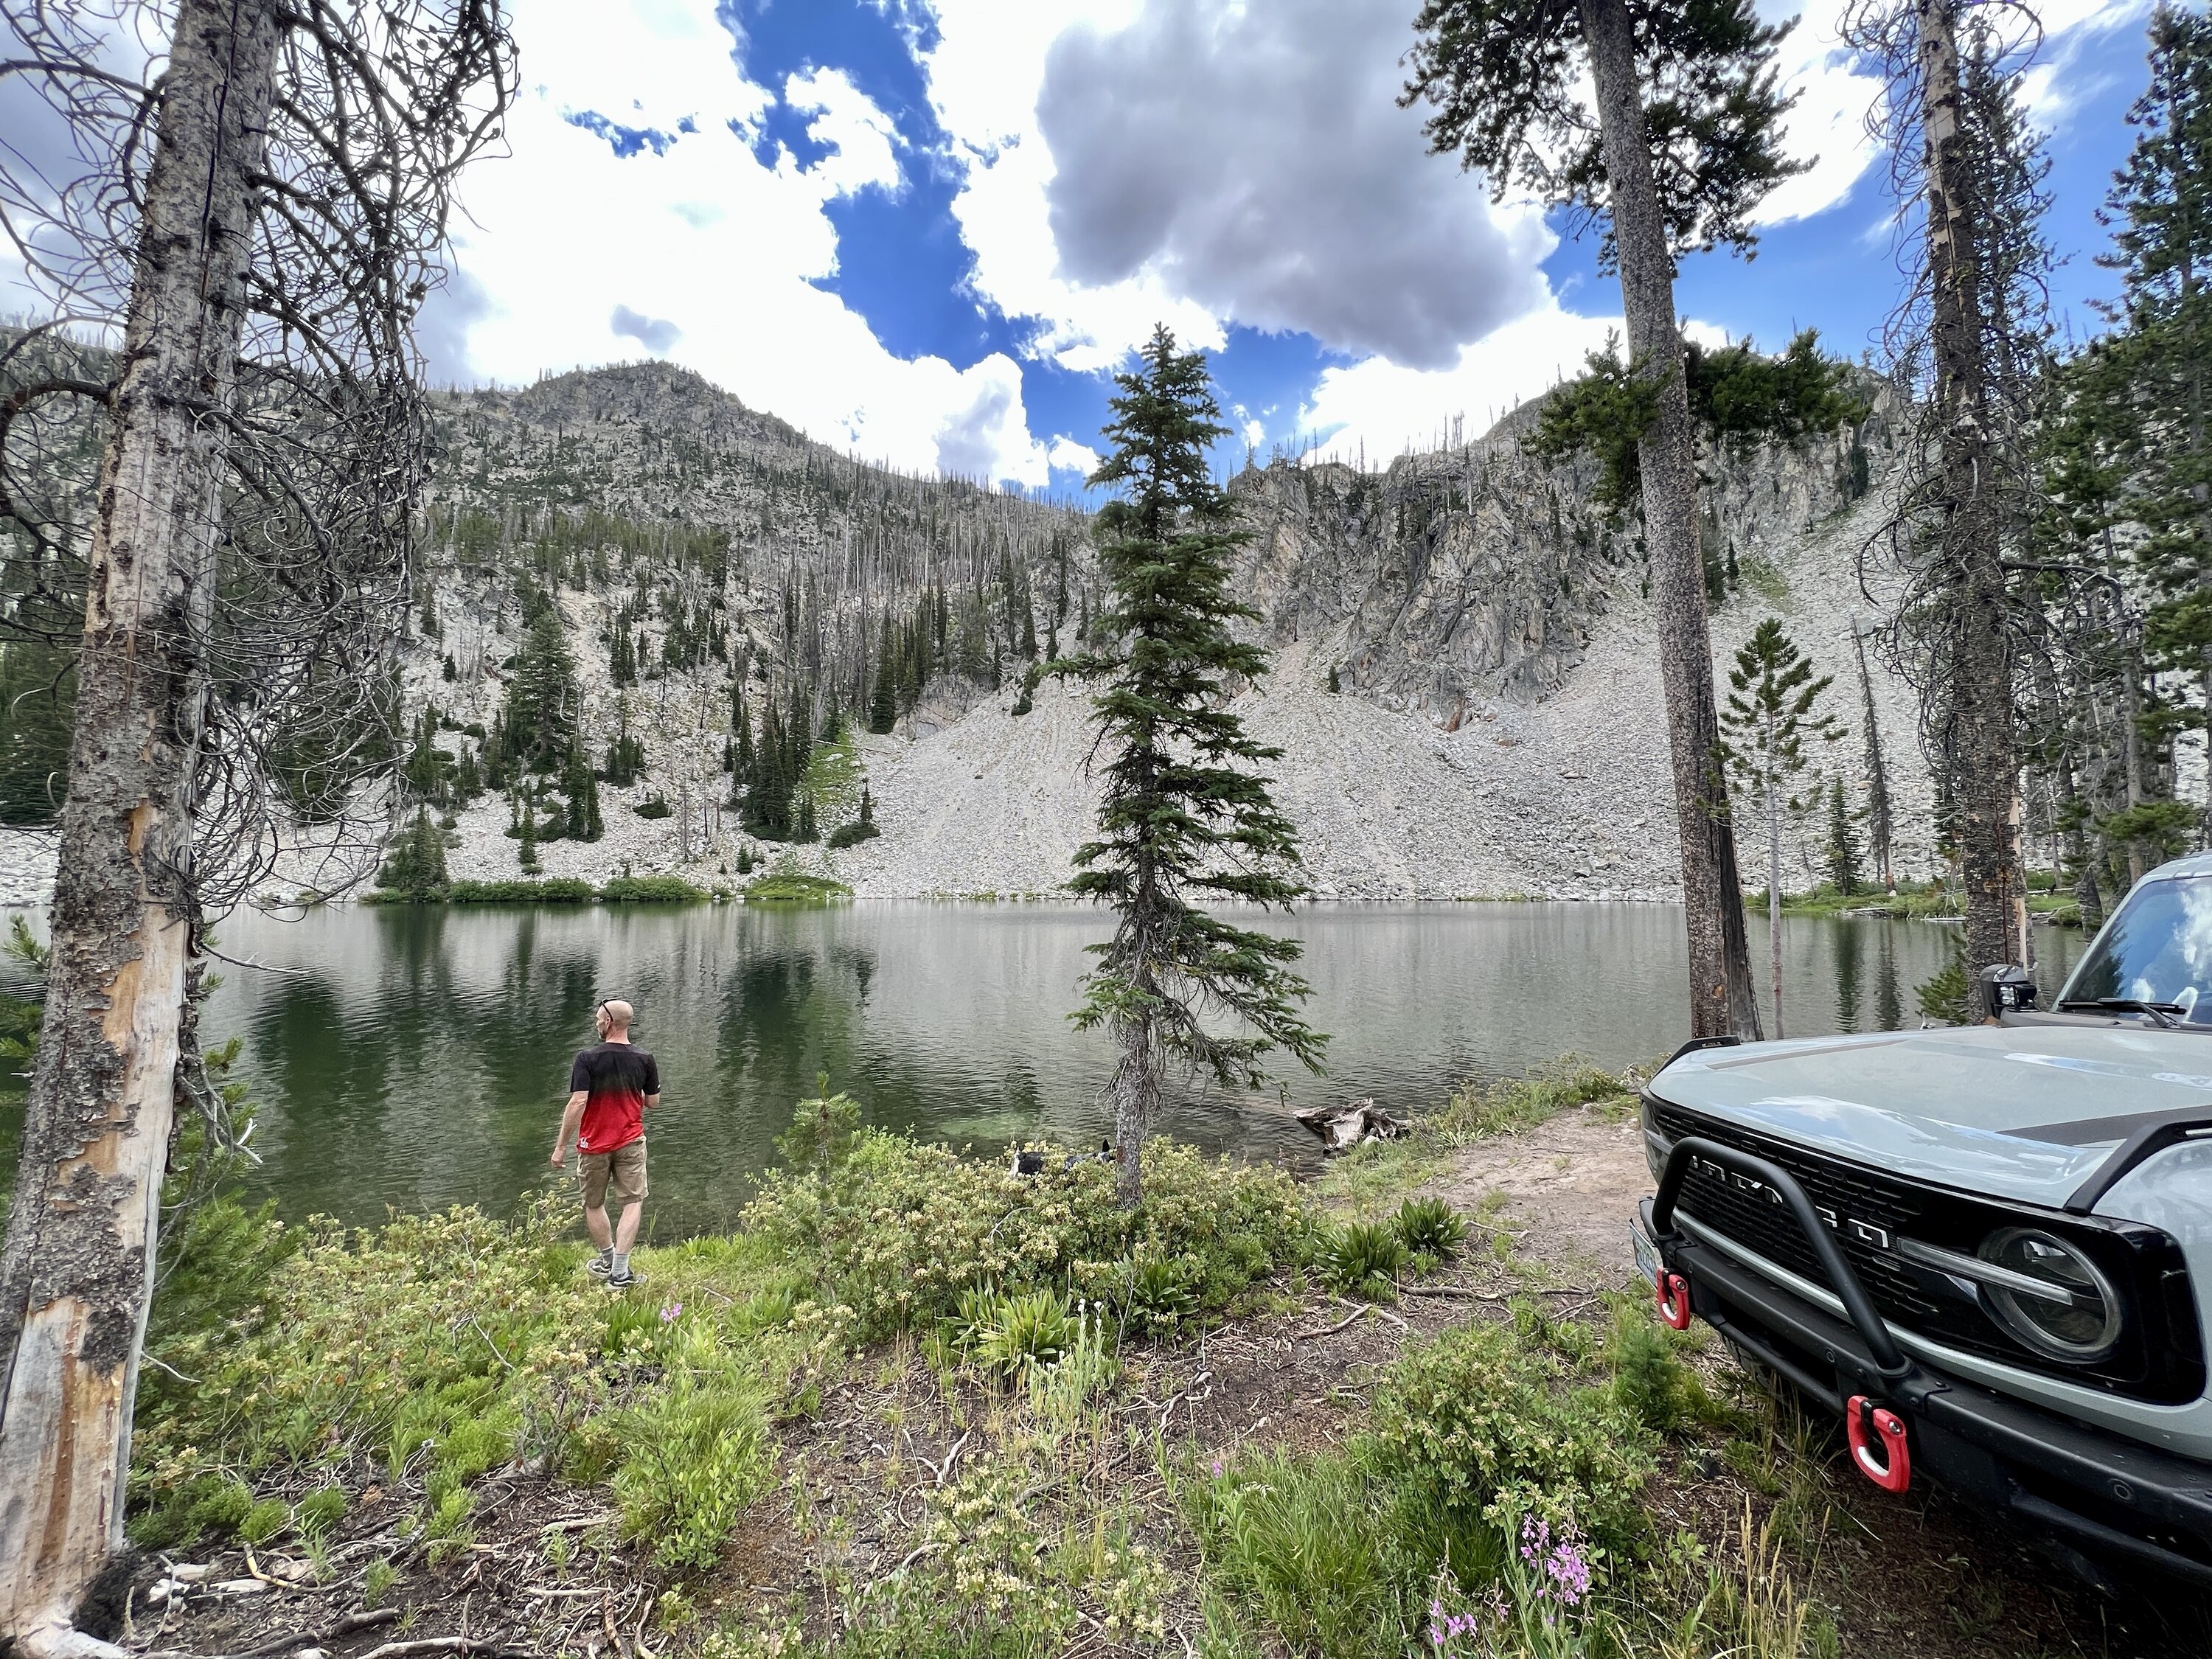 Ford Bronco Boise Bronco's in the WILDS! Seafoam Lake trail Idaho 987D5A4F-363F-428C-BB19-5E977F4EC4F0